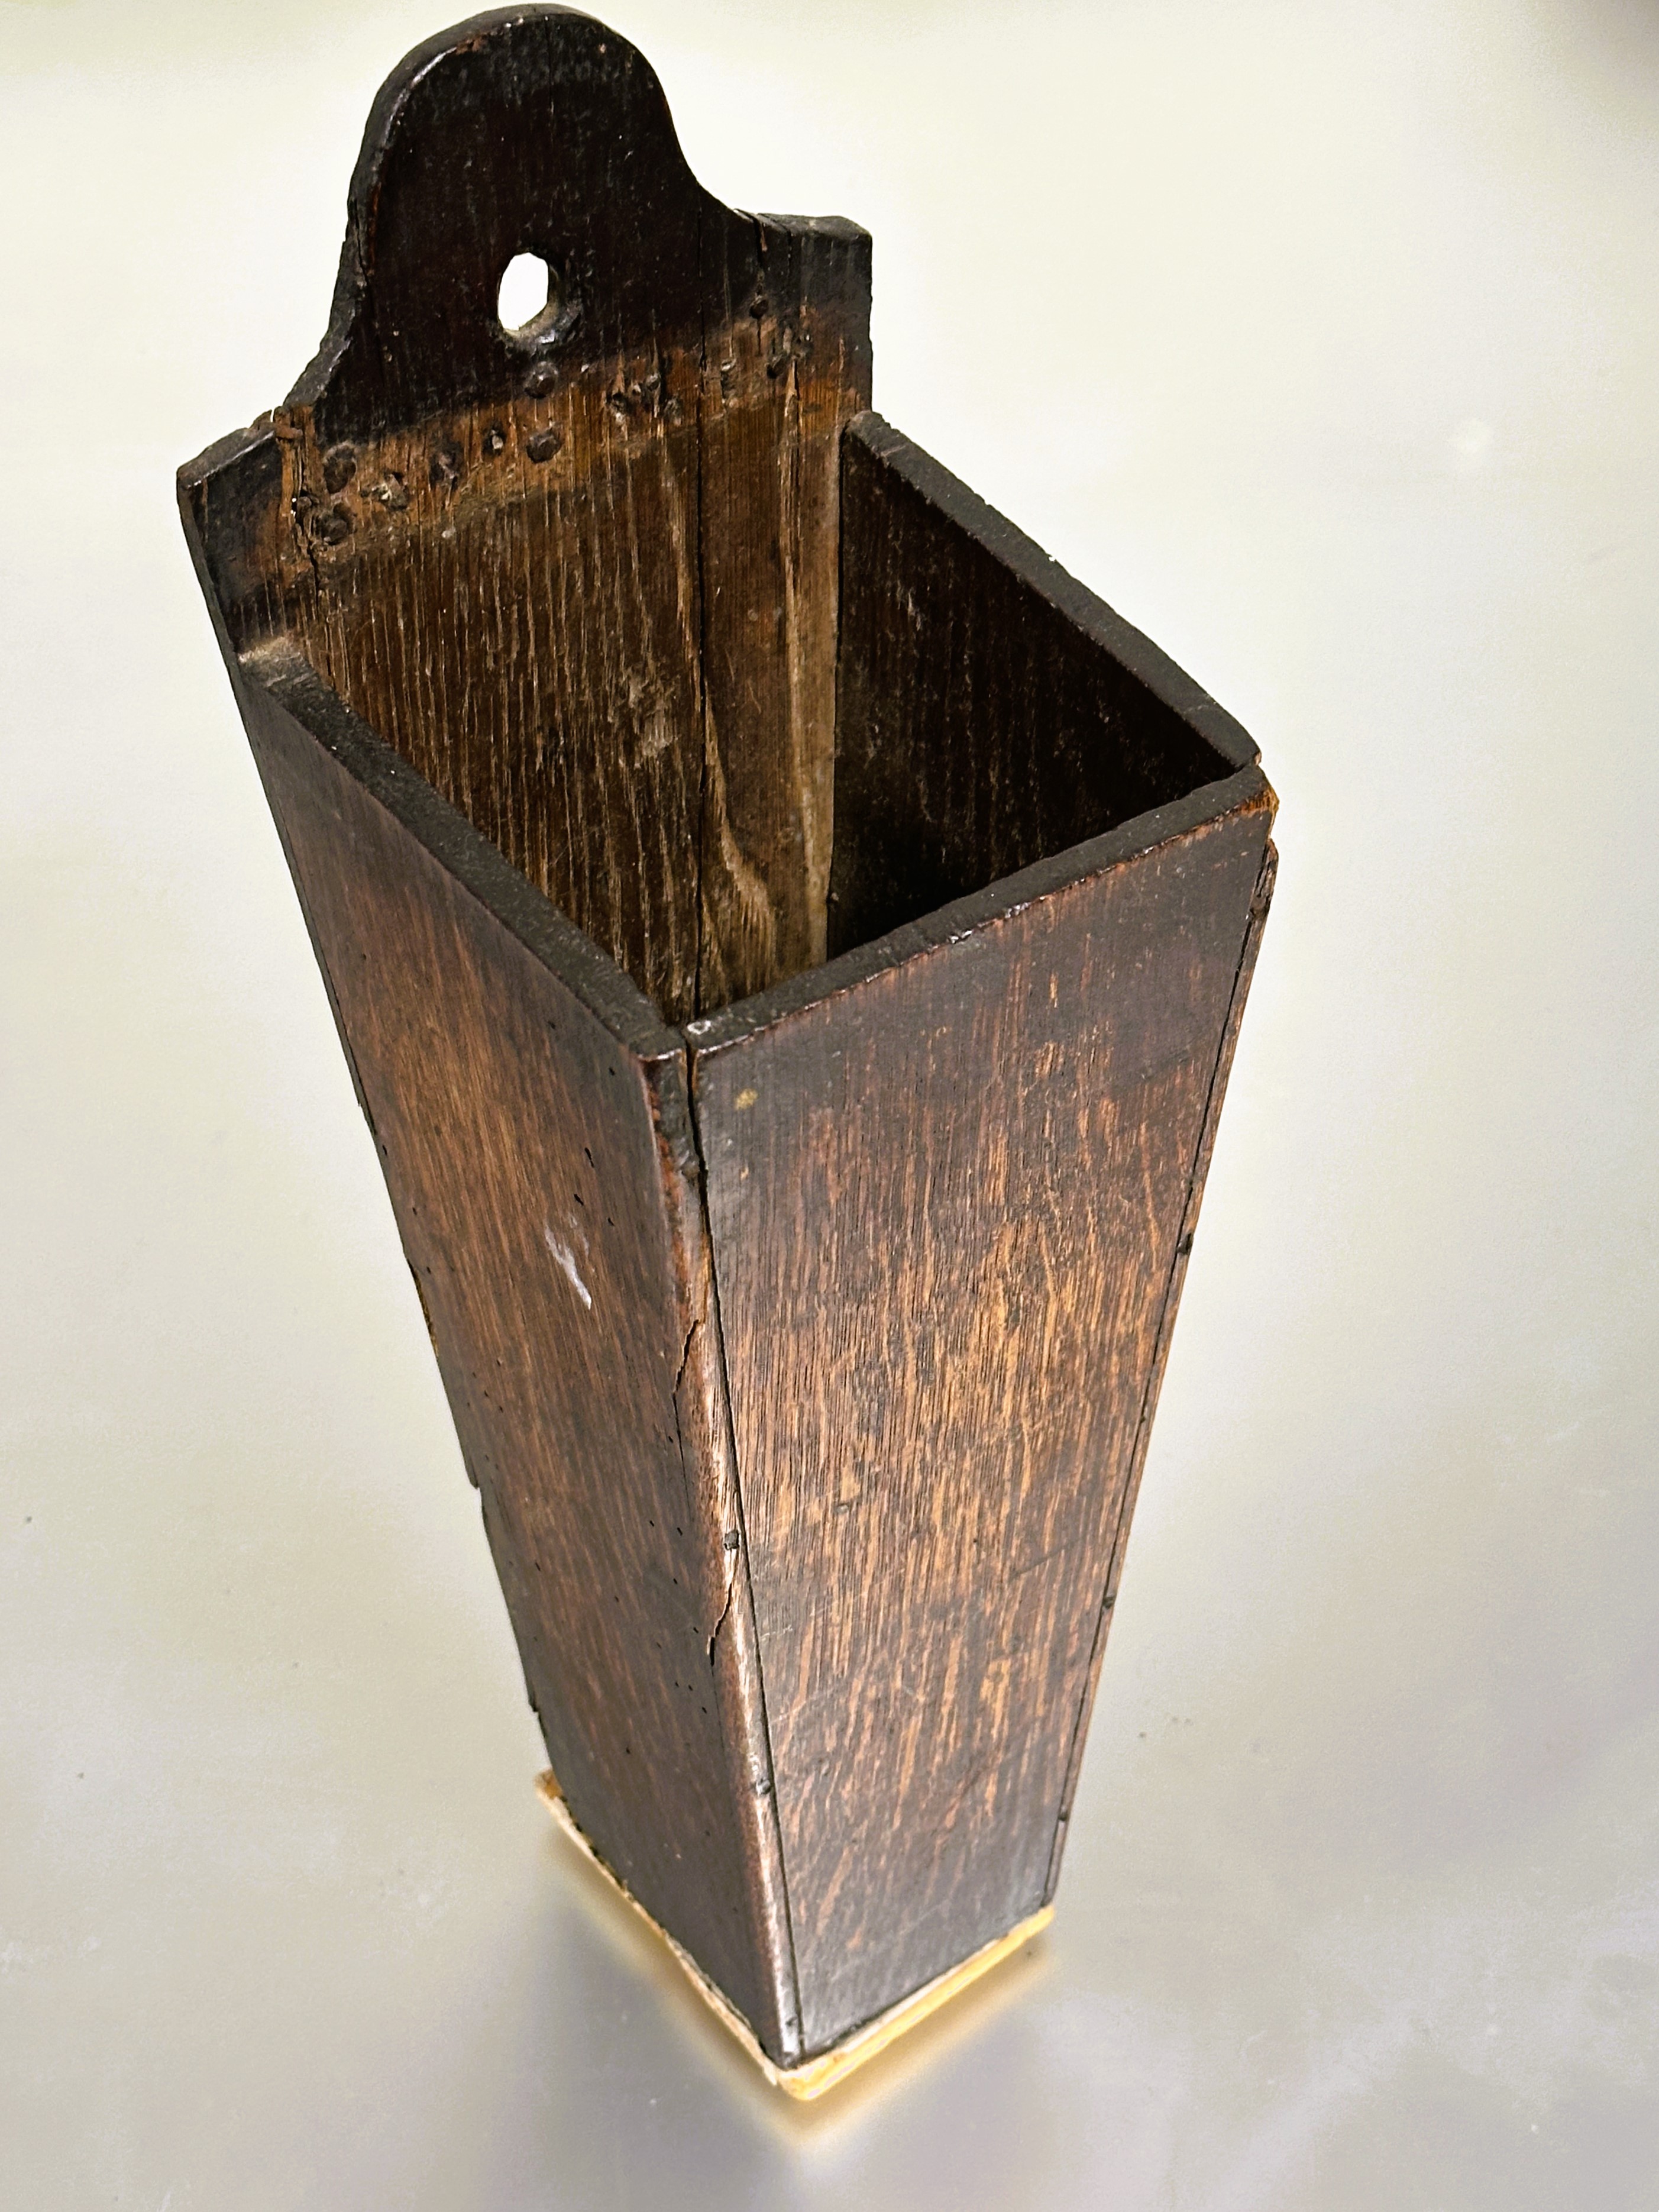 A 18thc oak candle box of tapered form with arched panel back with pierced hole and replaced base